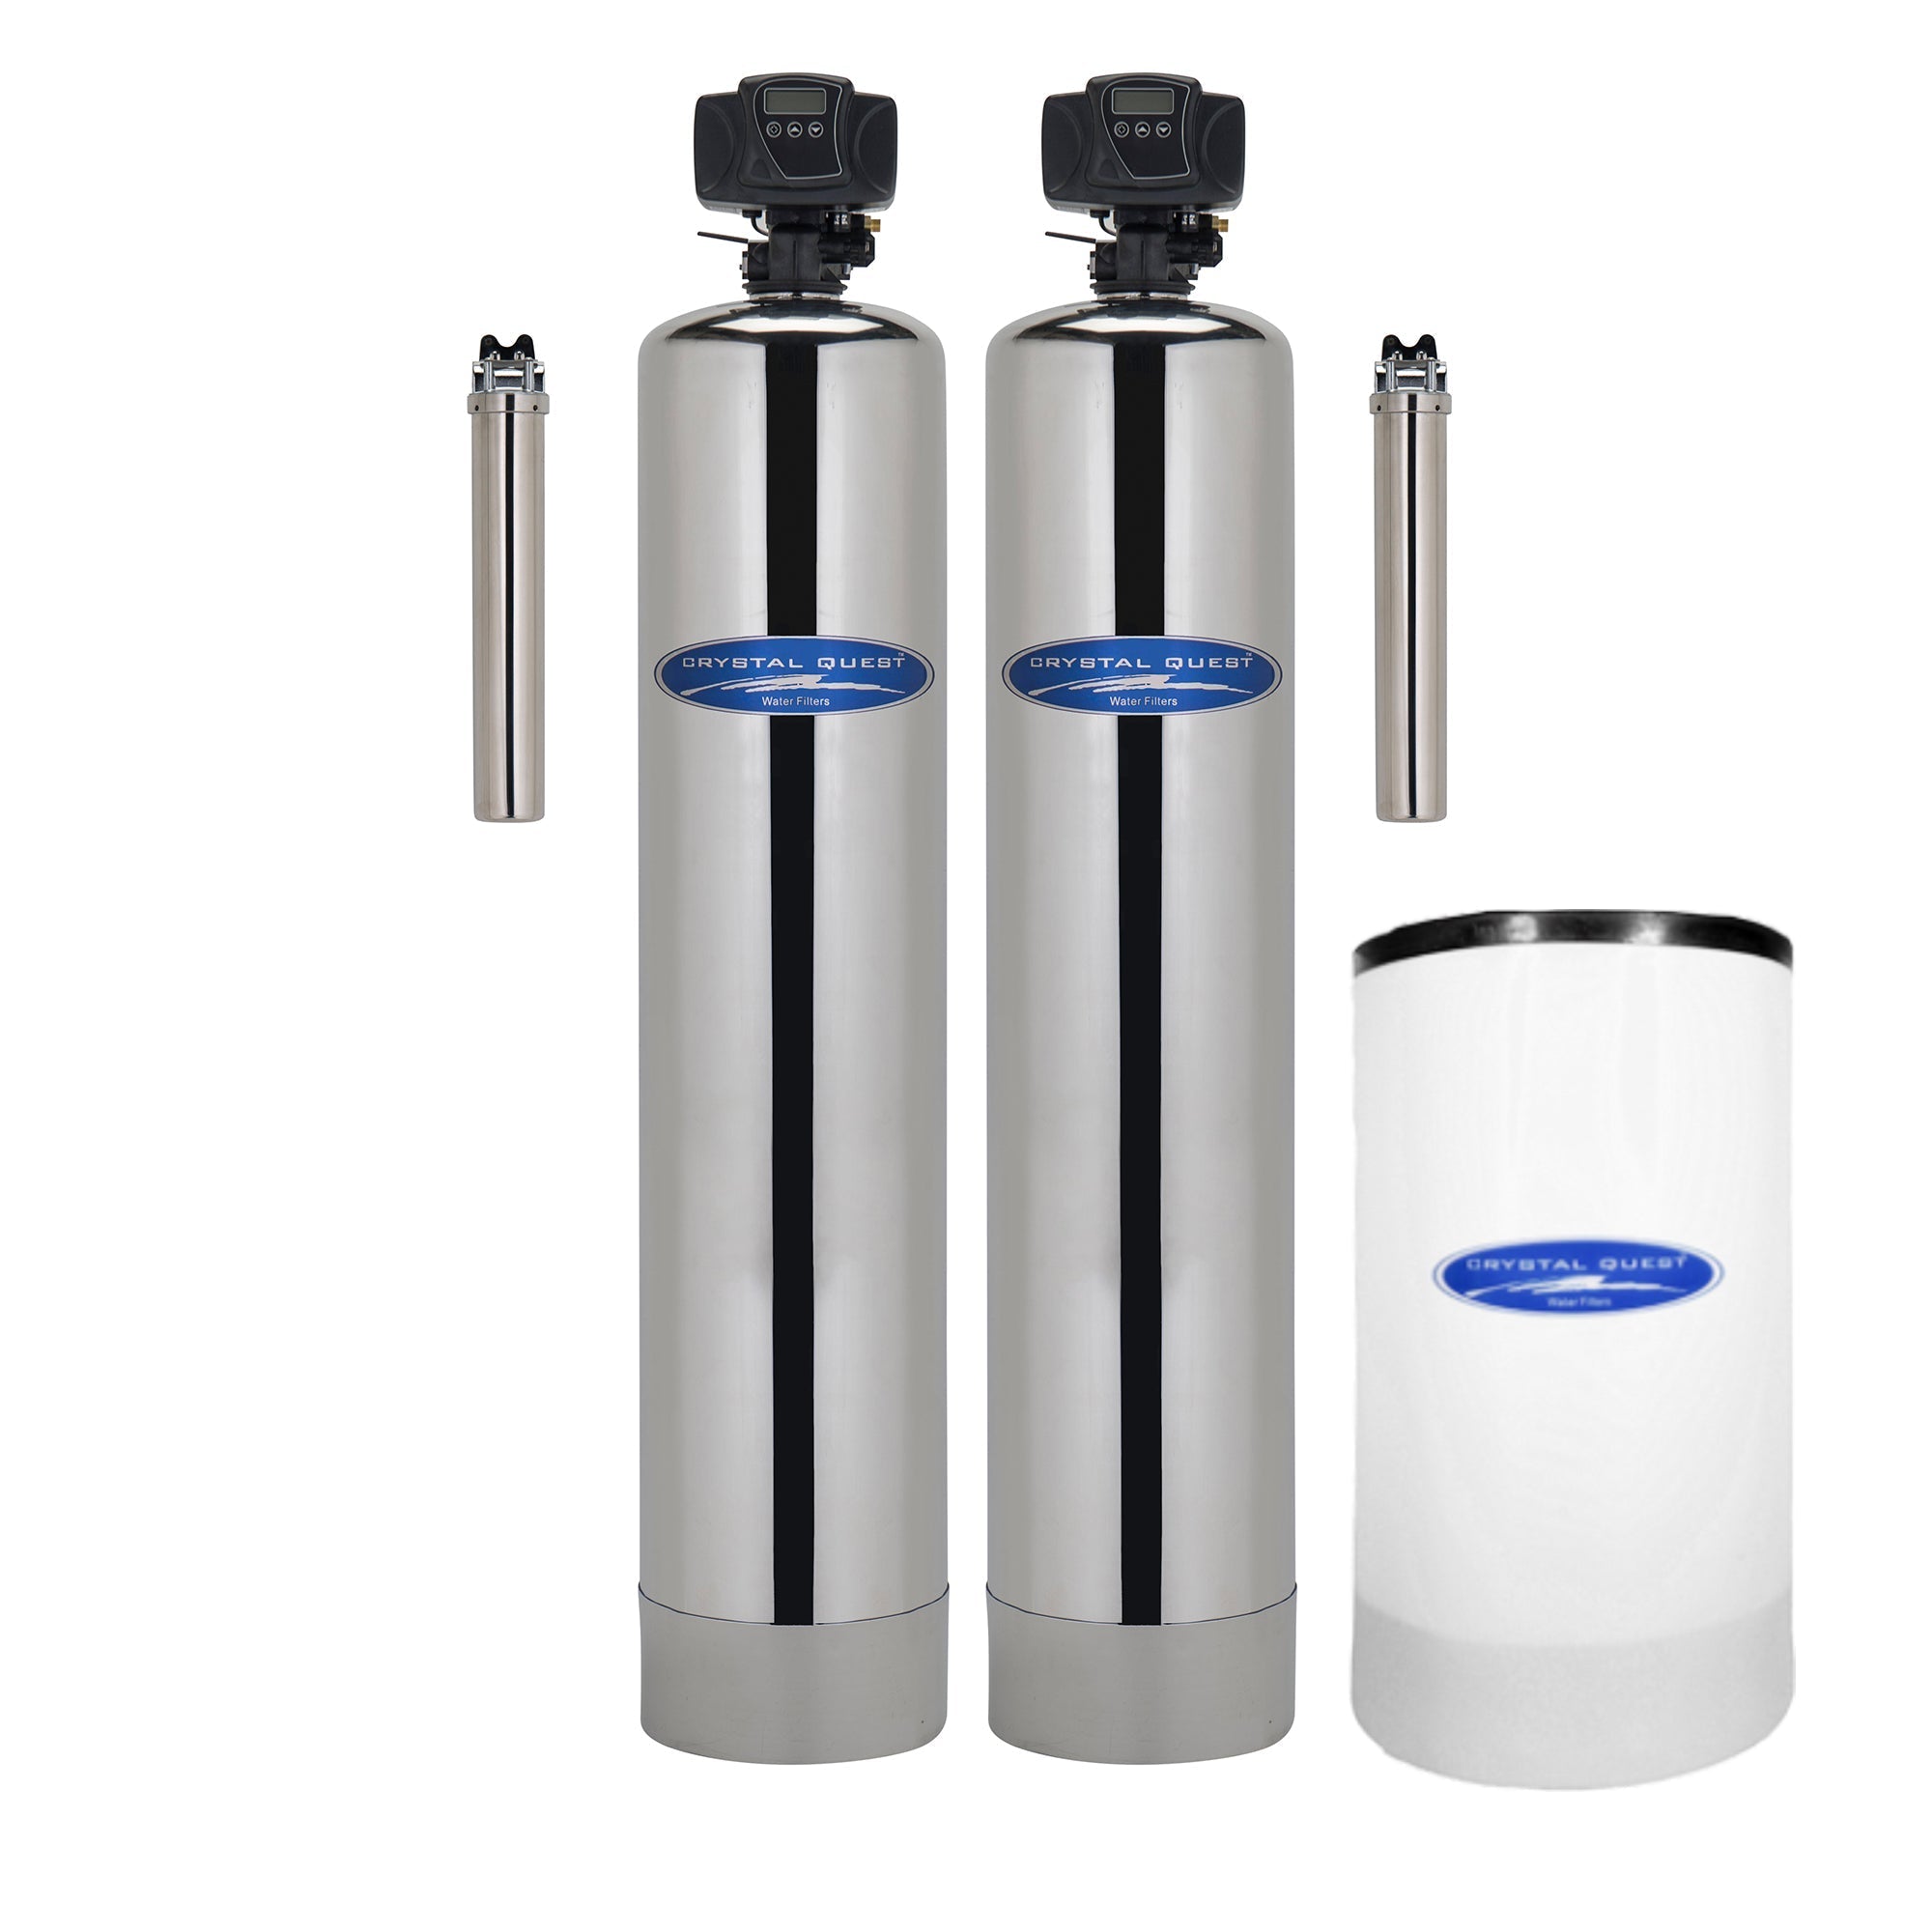 Add Softener / Stainless Steel / 1.5 Arsenic Whole House Water Filter - Whole House Water Filters - Crystal Quest